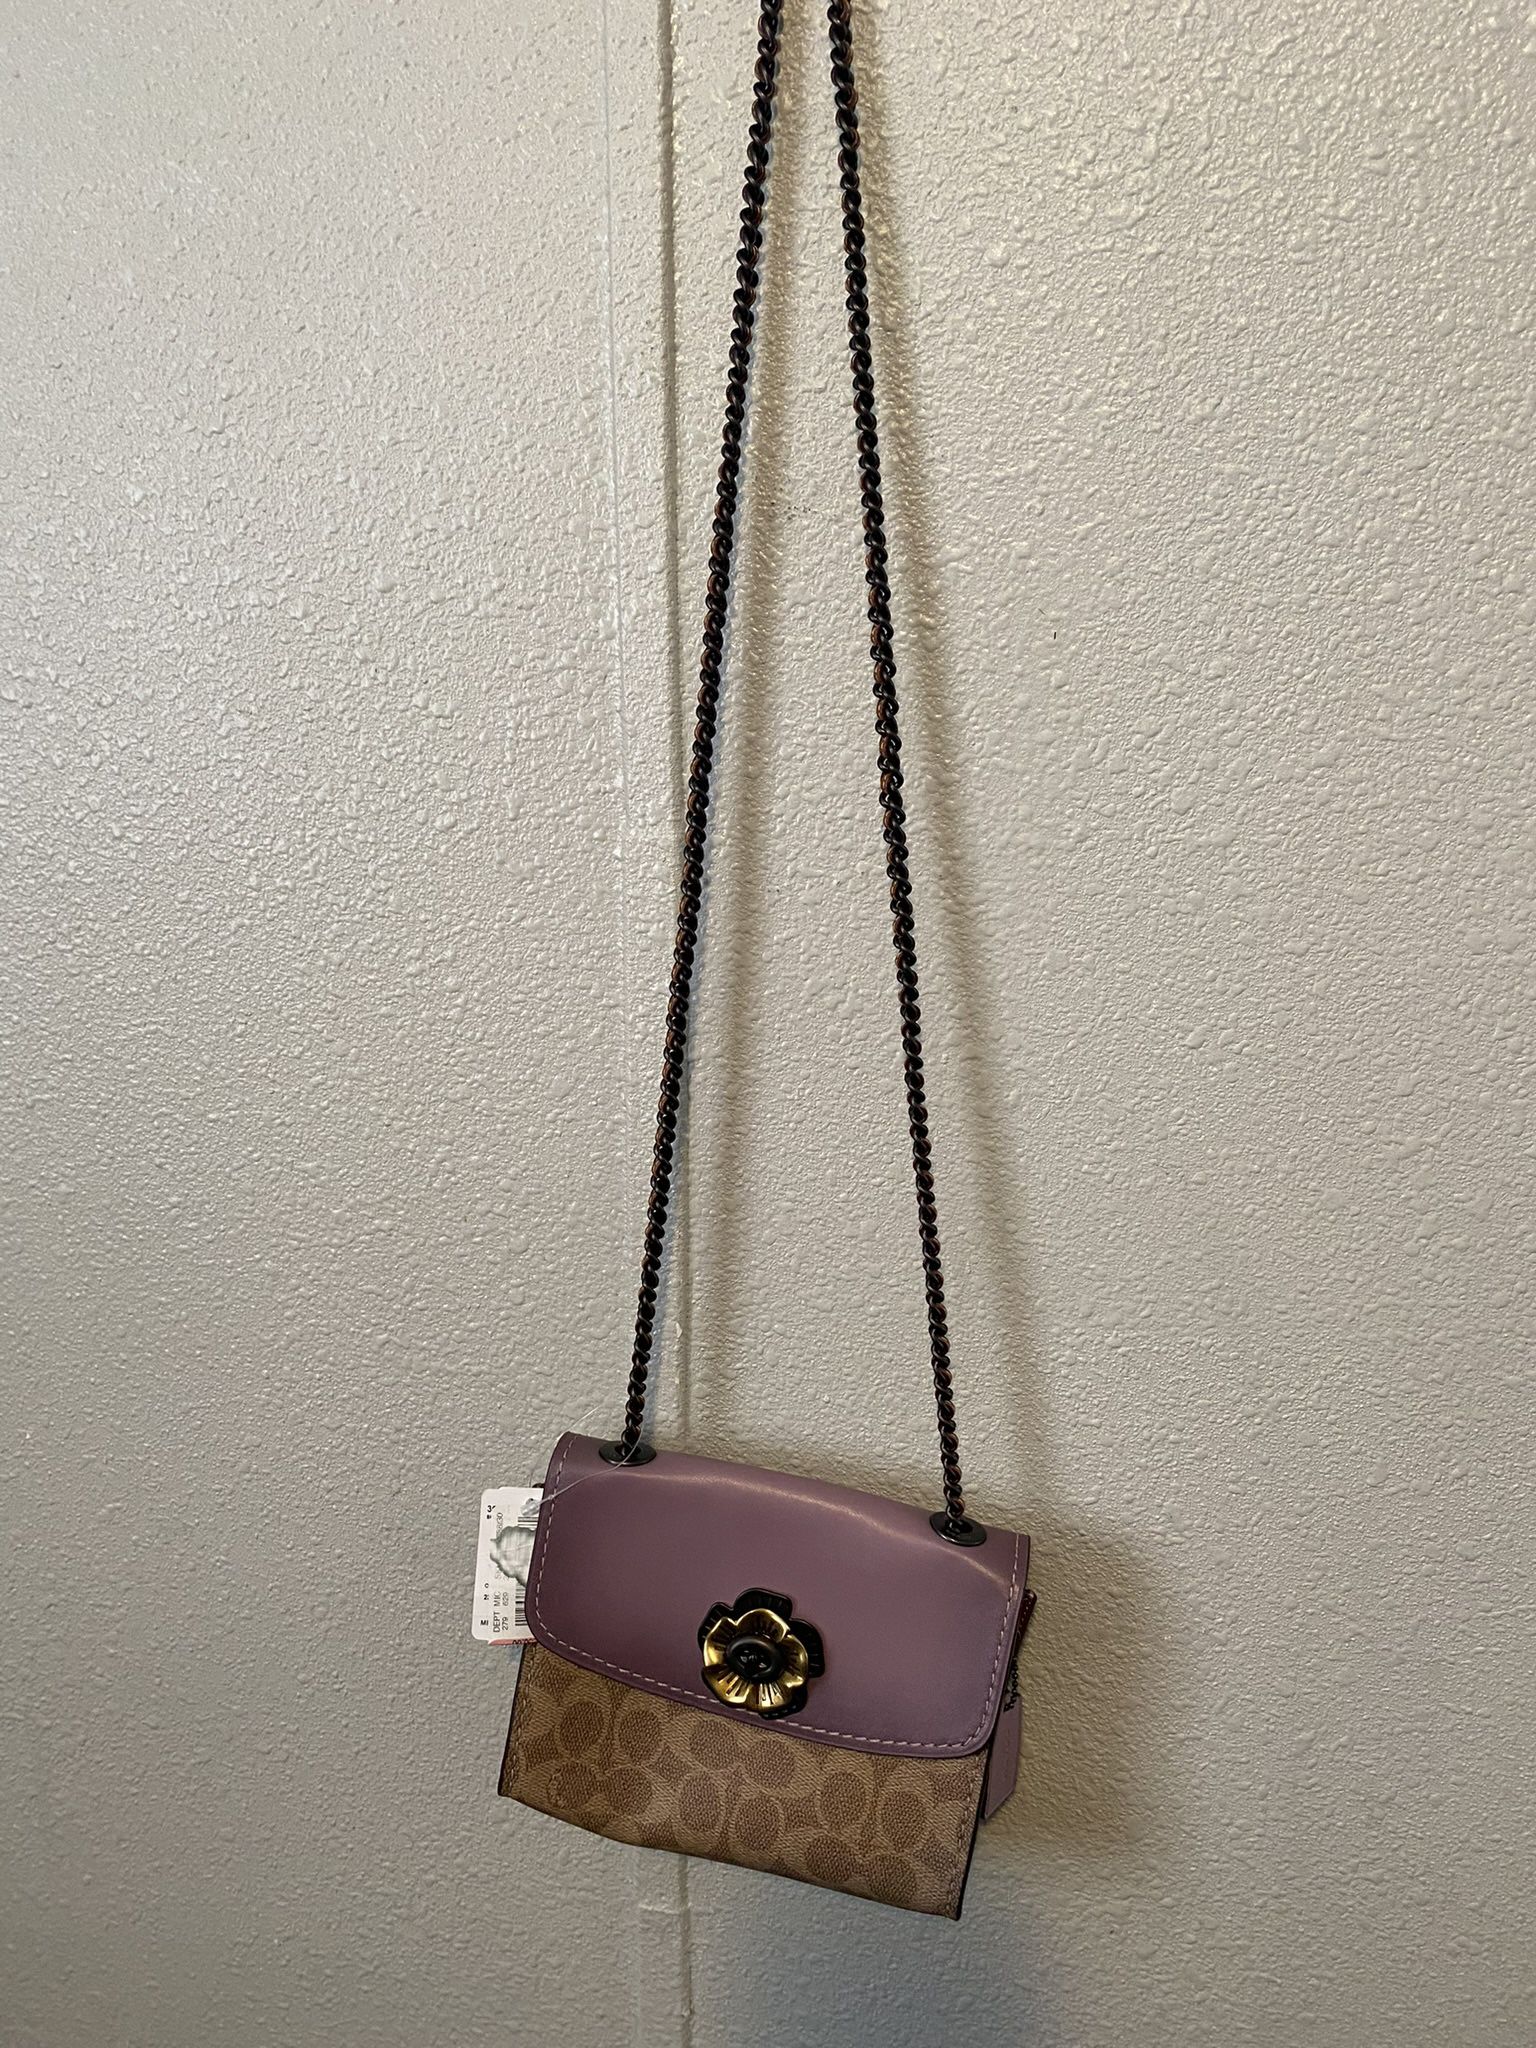 New small coach purse can fit keys phone cards and cash $125